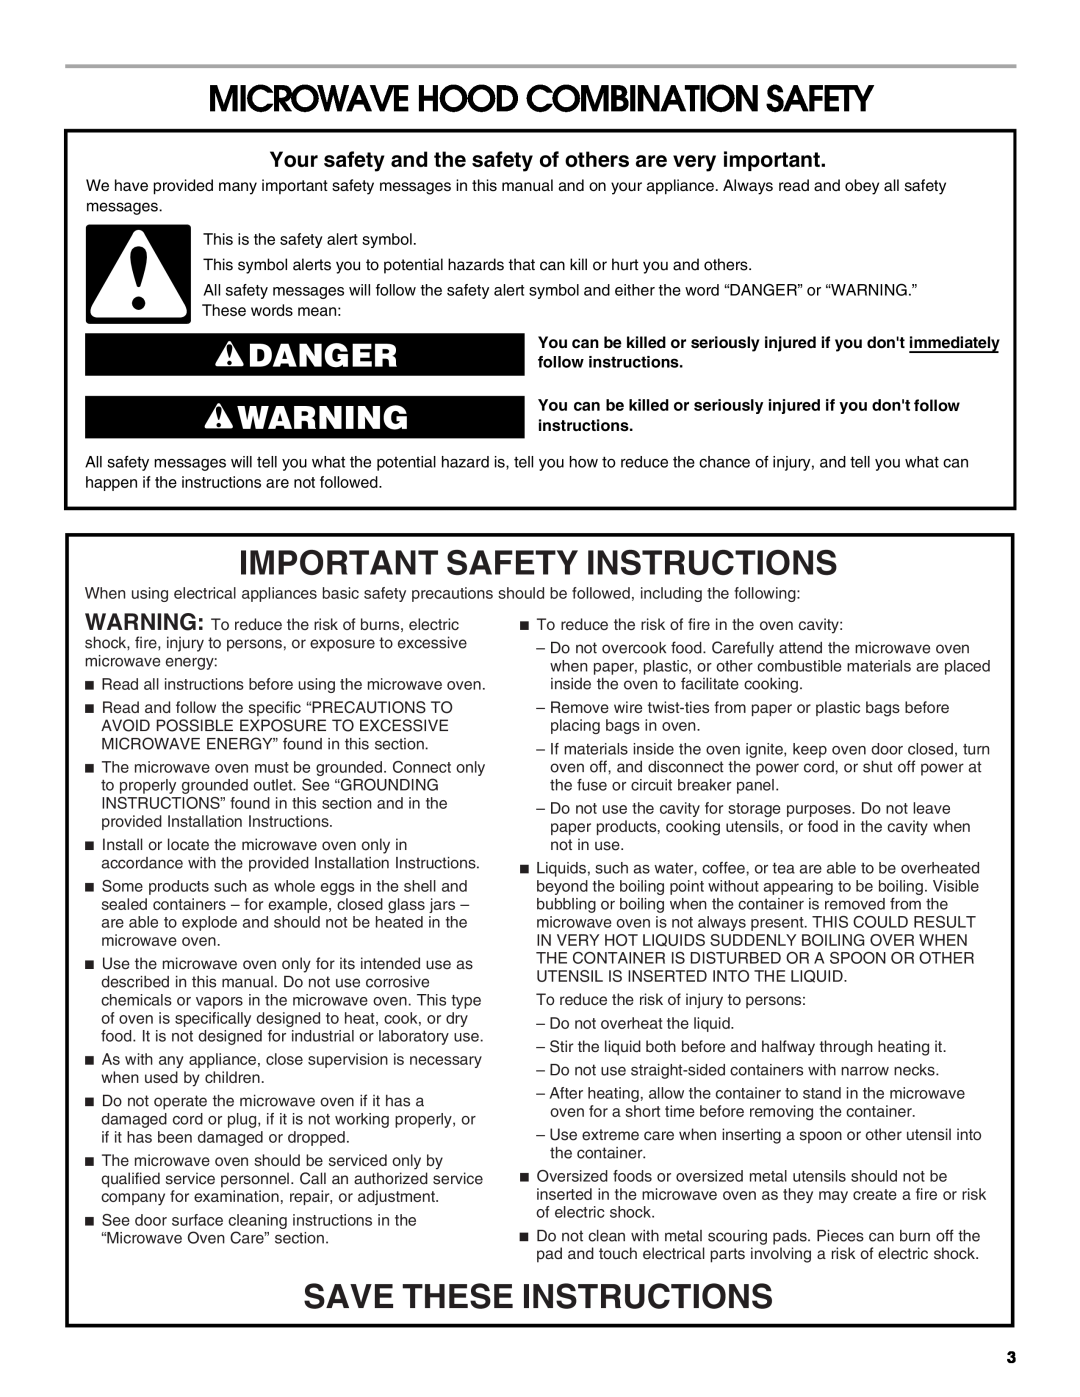 IKEA IMH15, IMH16 manual Microwave Hood Combination Safety, Important Safety Instructions, Save These Instructions, Danger 